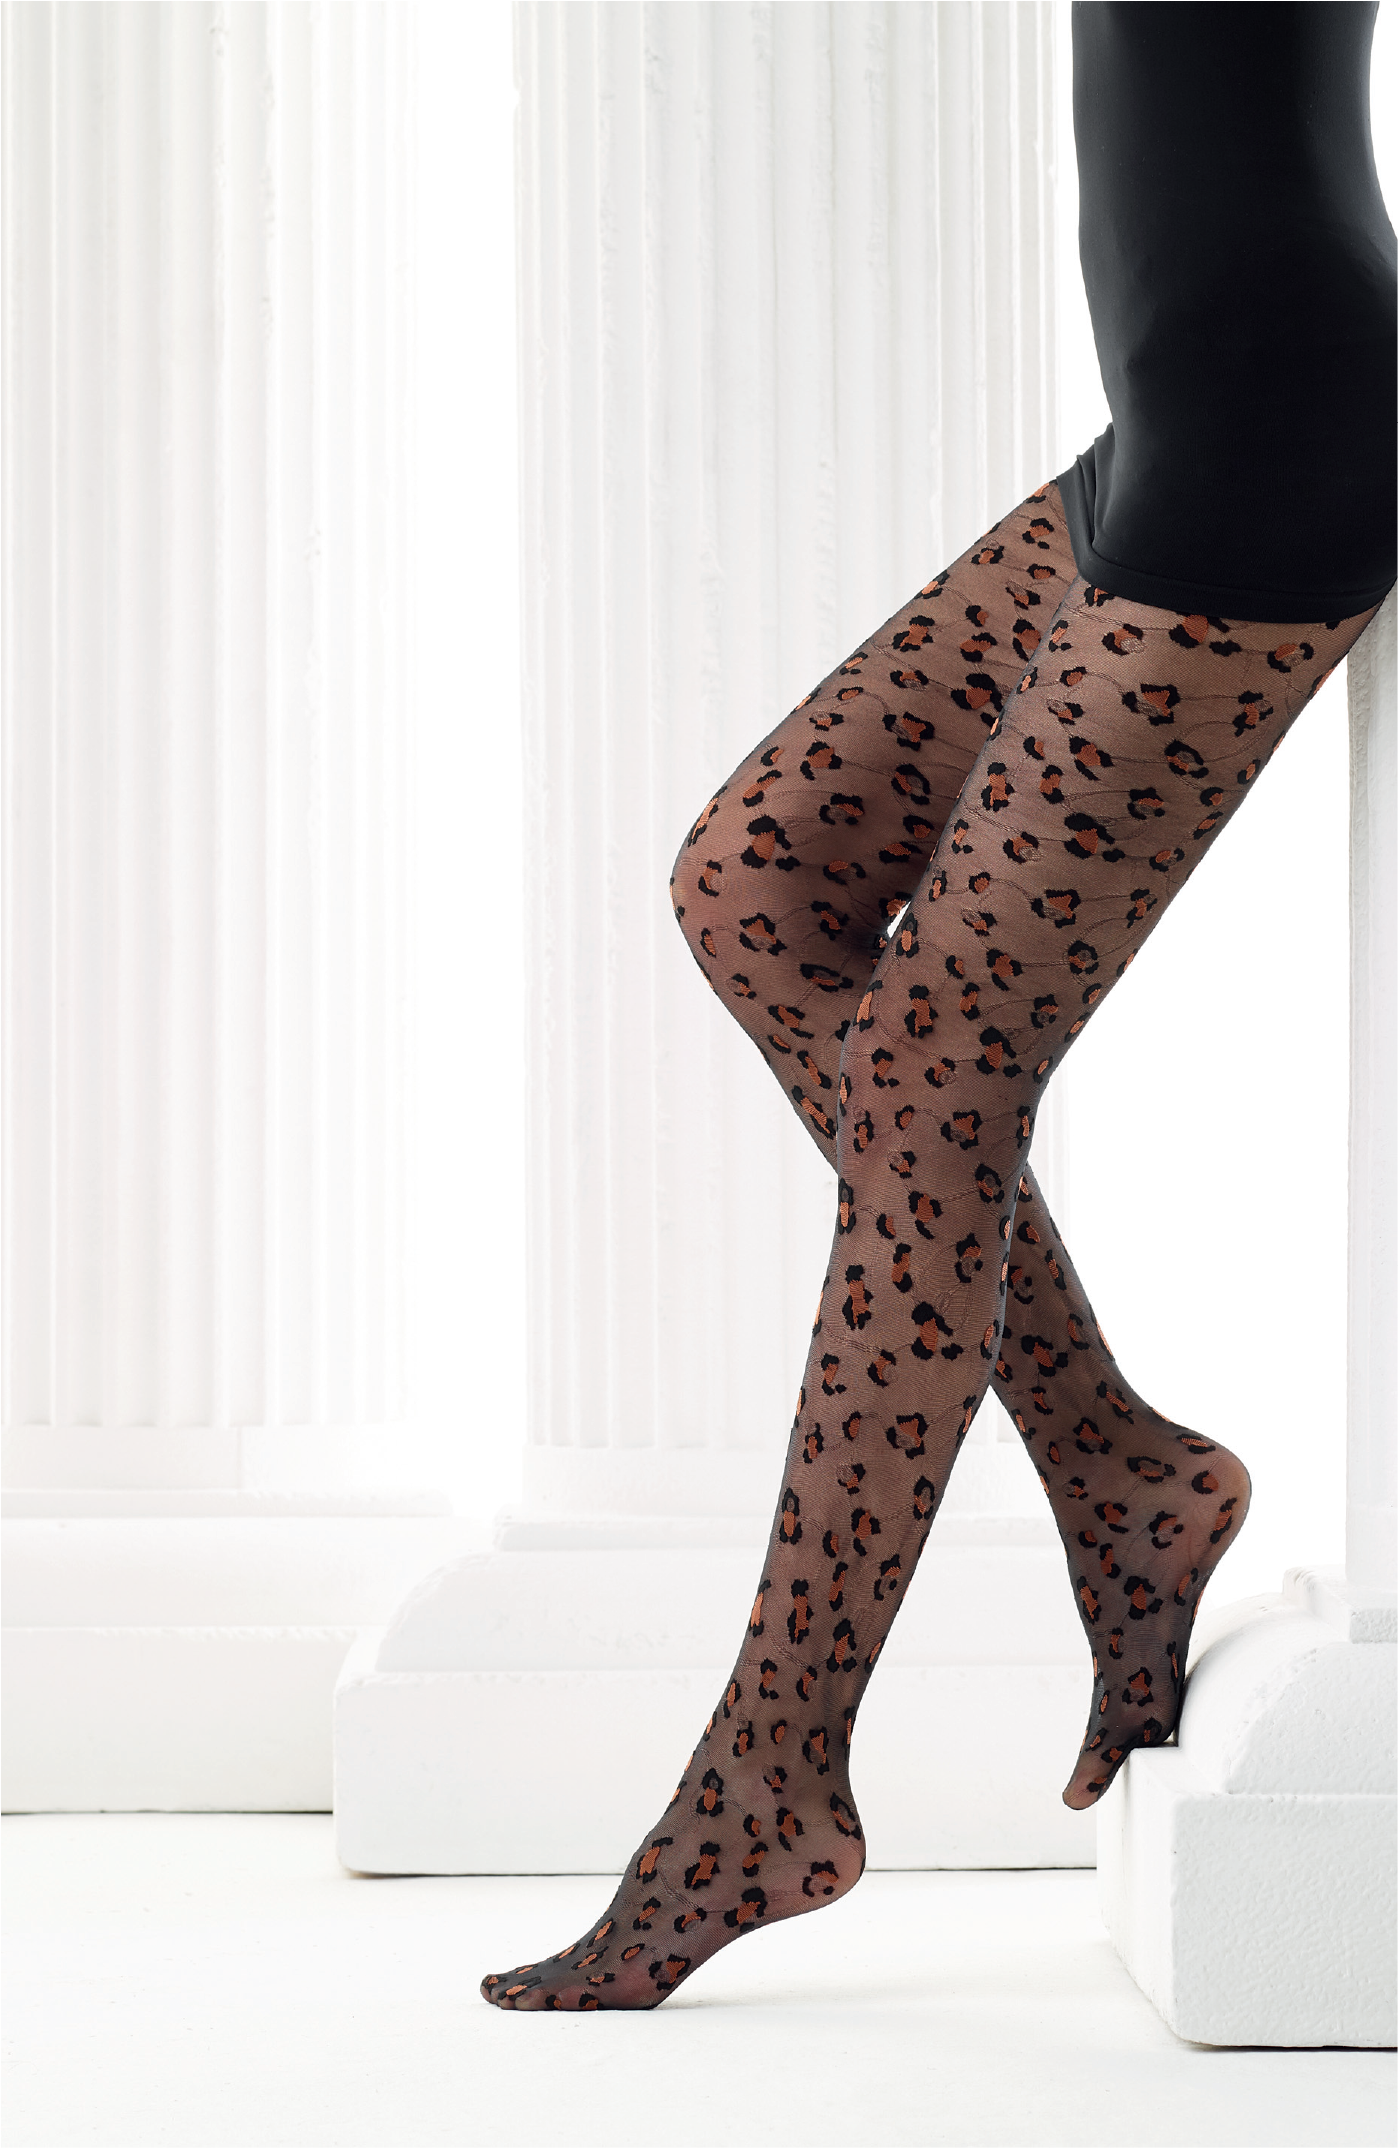 Omero Zuri Collant - Sheer black fashion tights with a rust colour woven leopard print style pattern, flat seams and hygienic gusset.